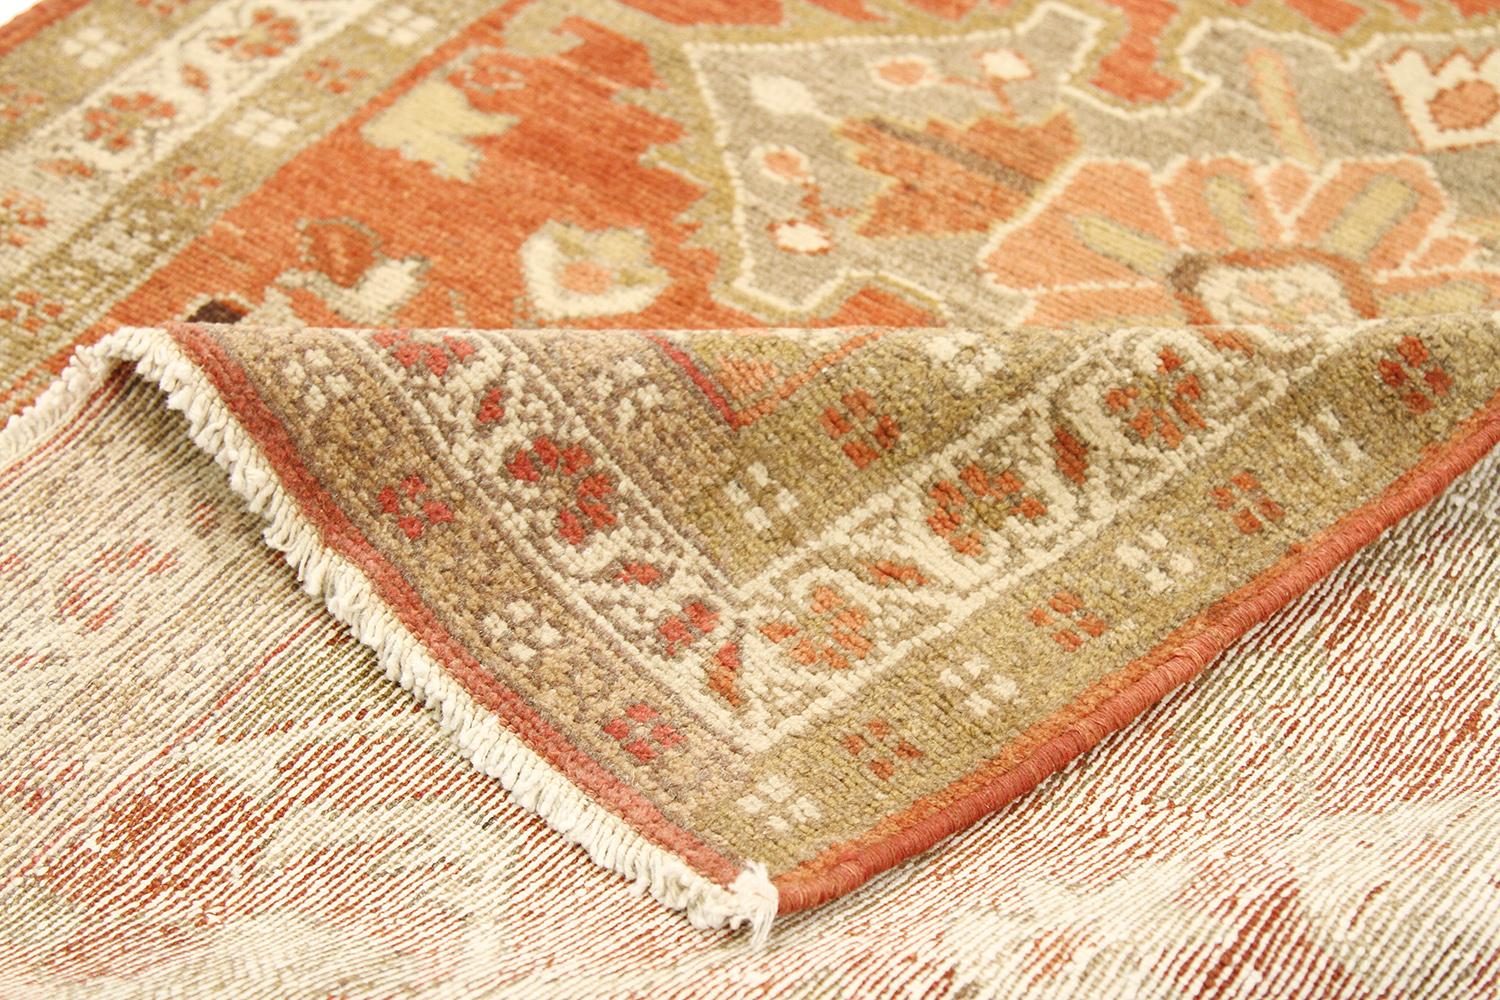 Hand-Woven Antique Persian Malayer Runner Rug with Ivory and Green Floral Patterns For Sale